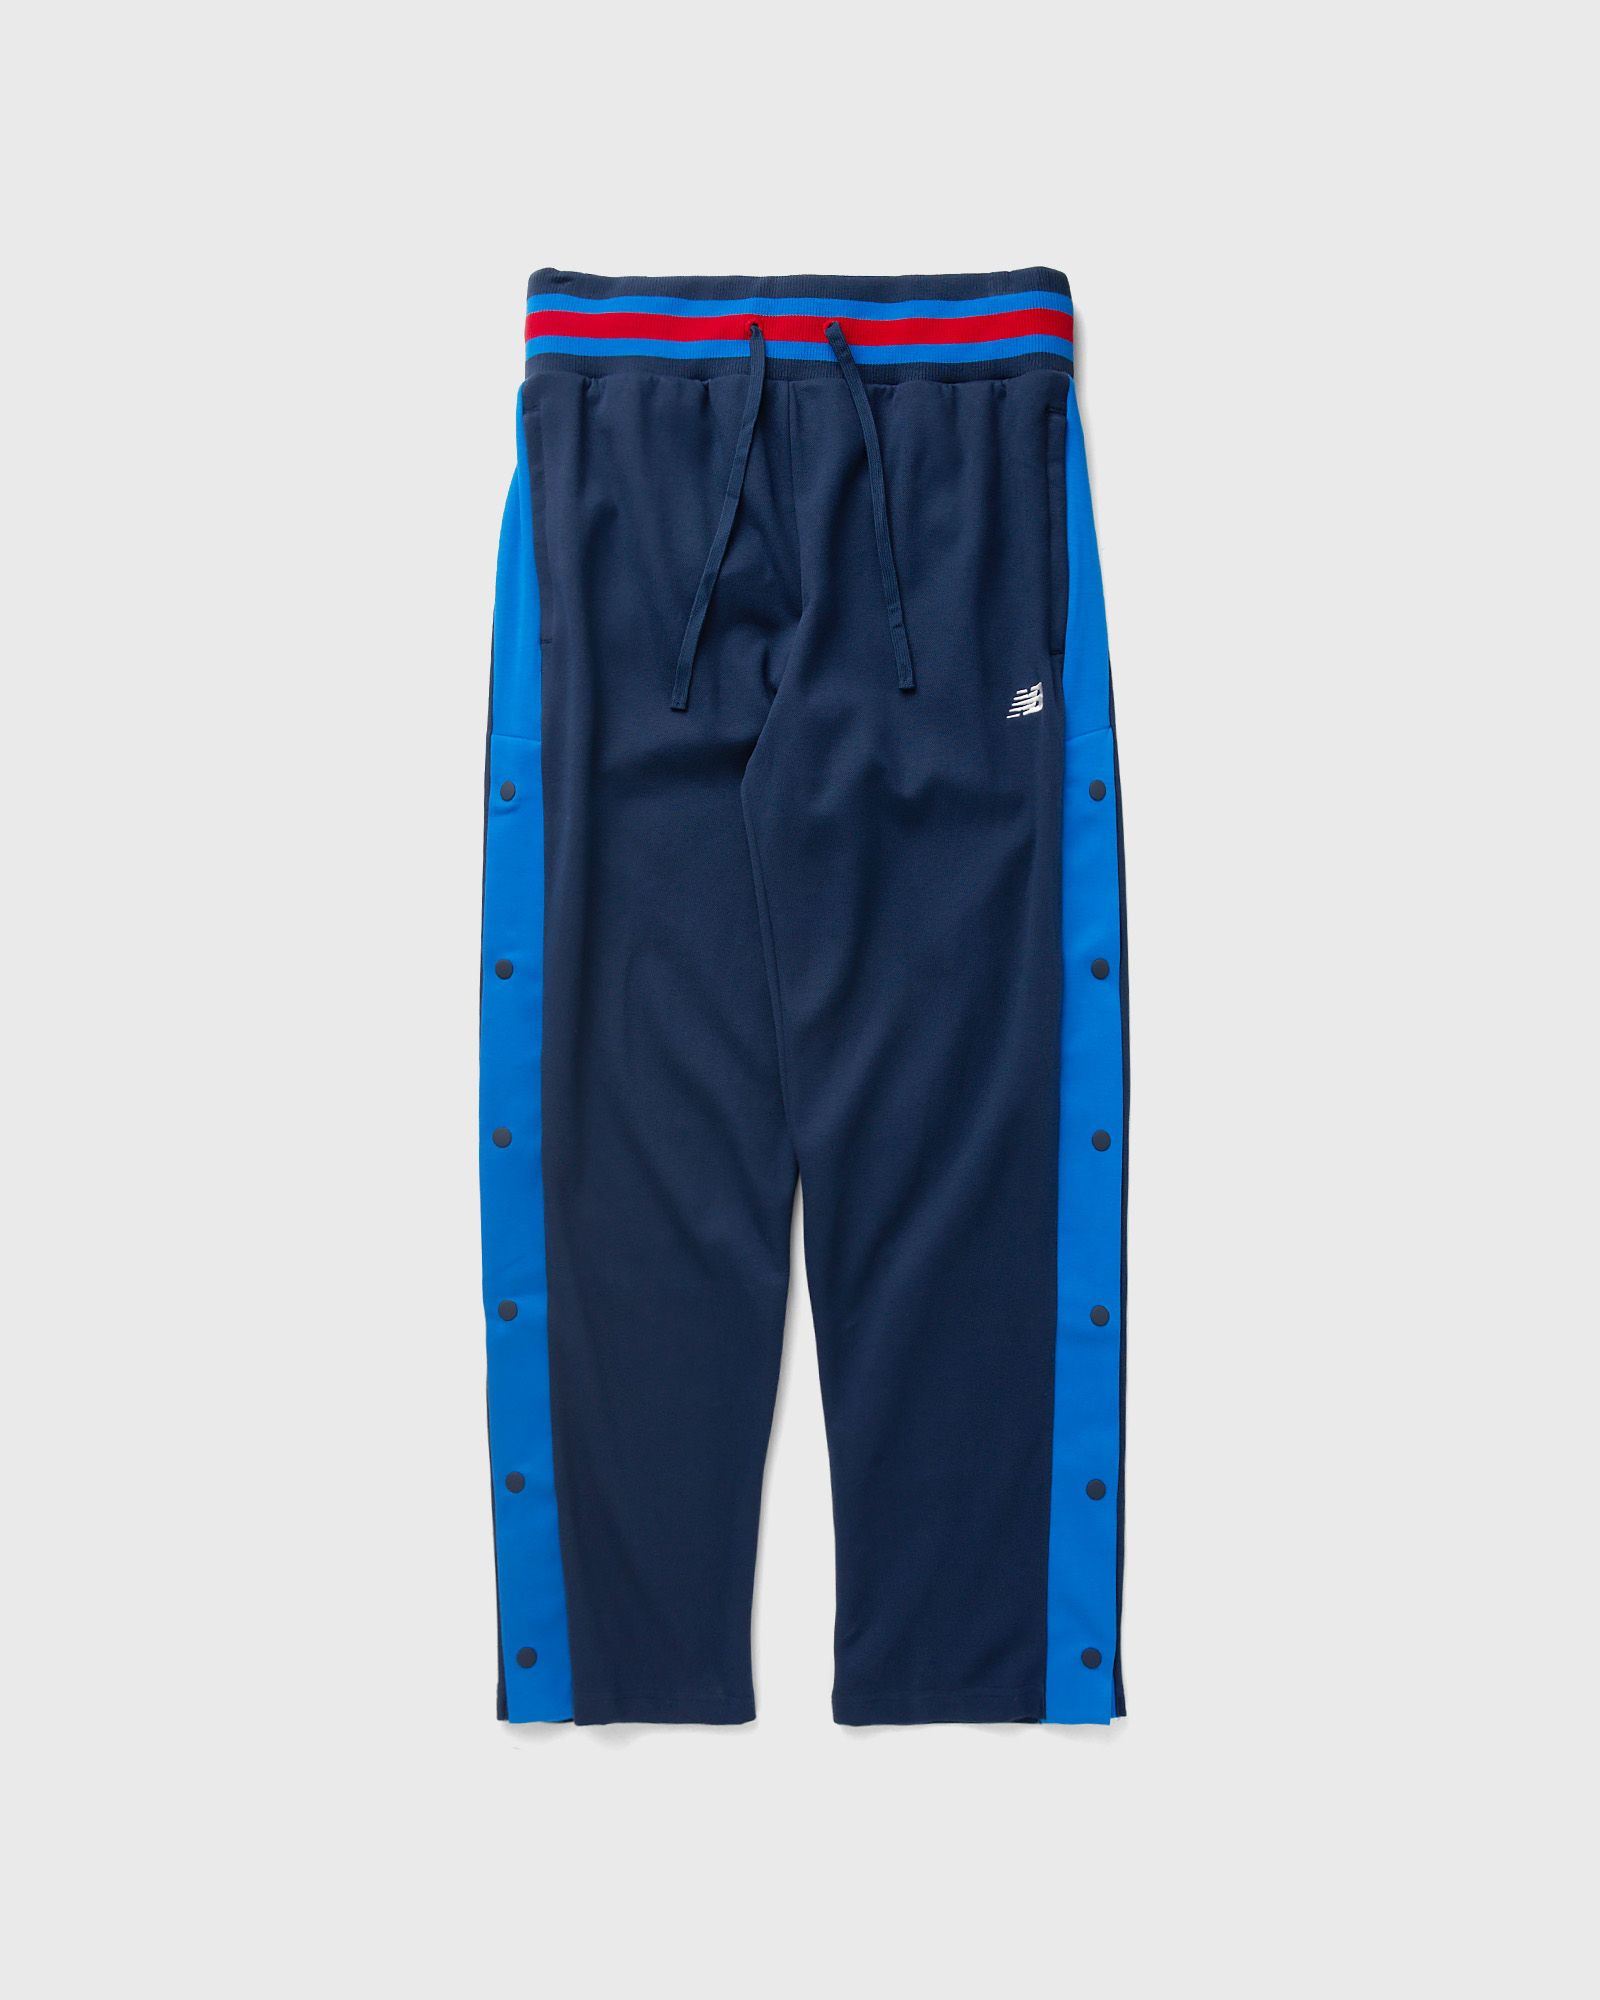 New Balance - sportswear greatest hits french terry pant men track pants blue in größe:xl